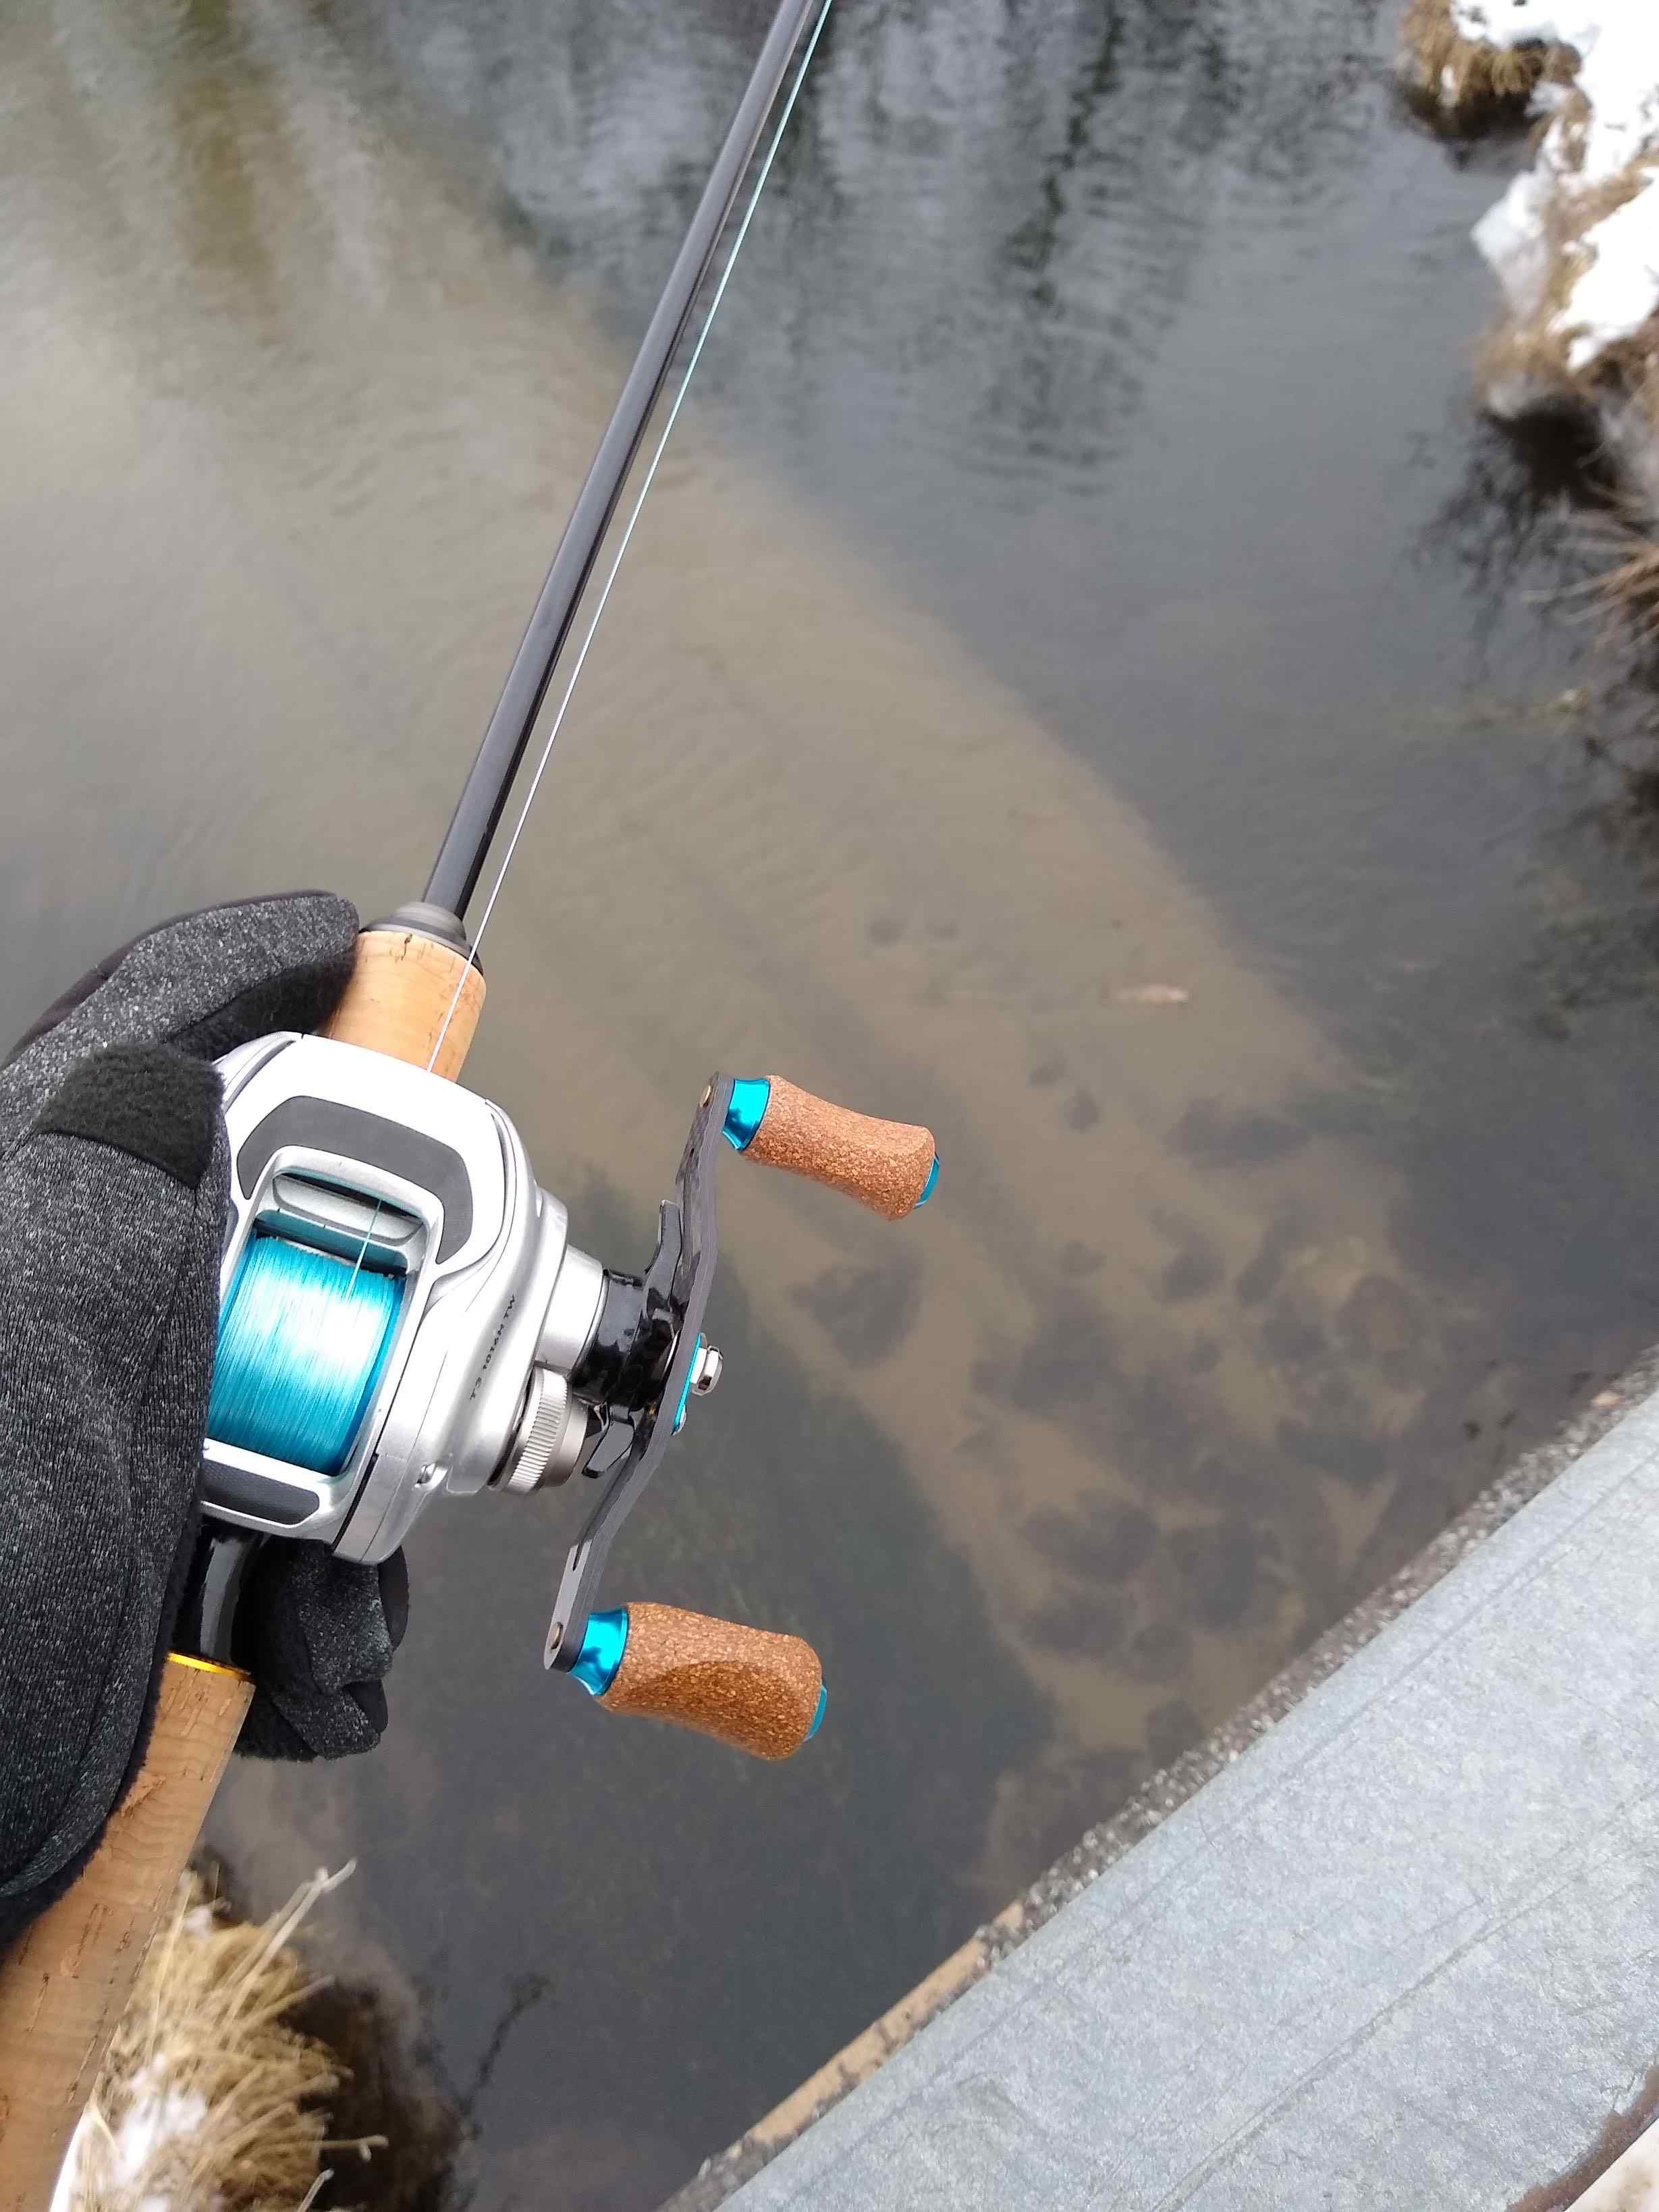 BFS Rod Recommendations Needed (short list included) - Fishing